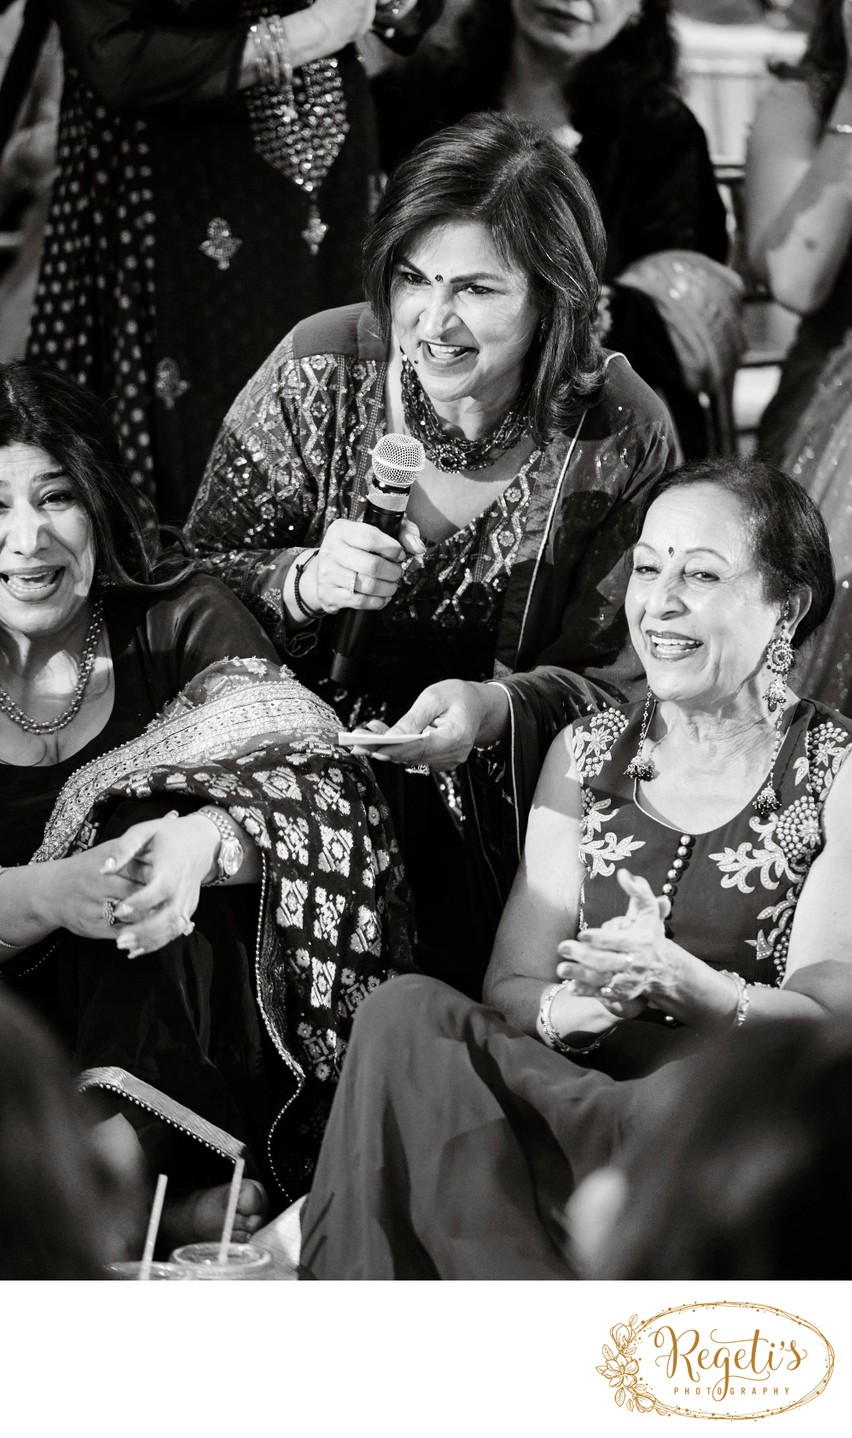 Aunties singing at an Indian Sangeet Ceremony